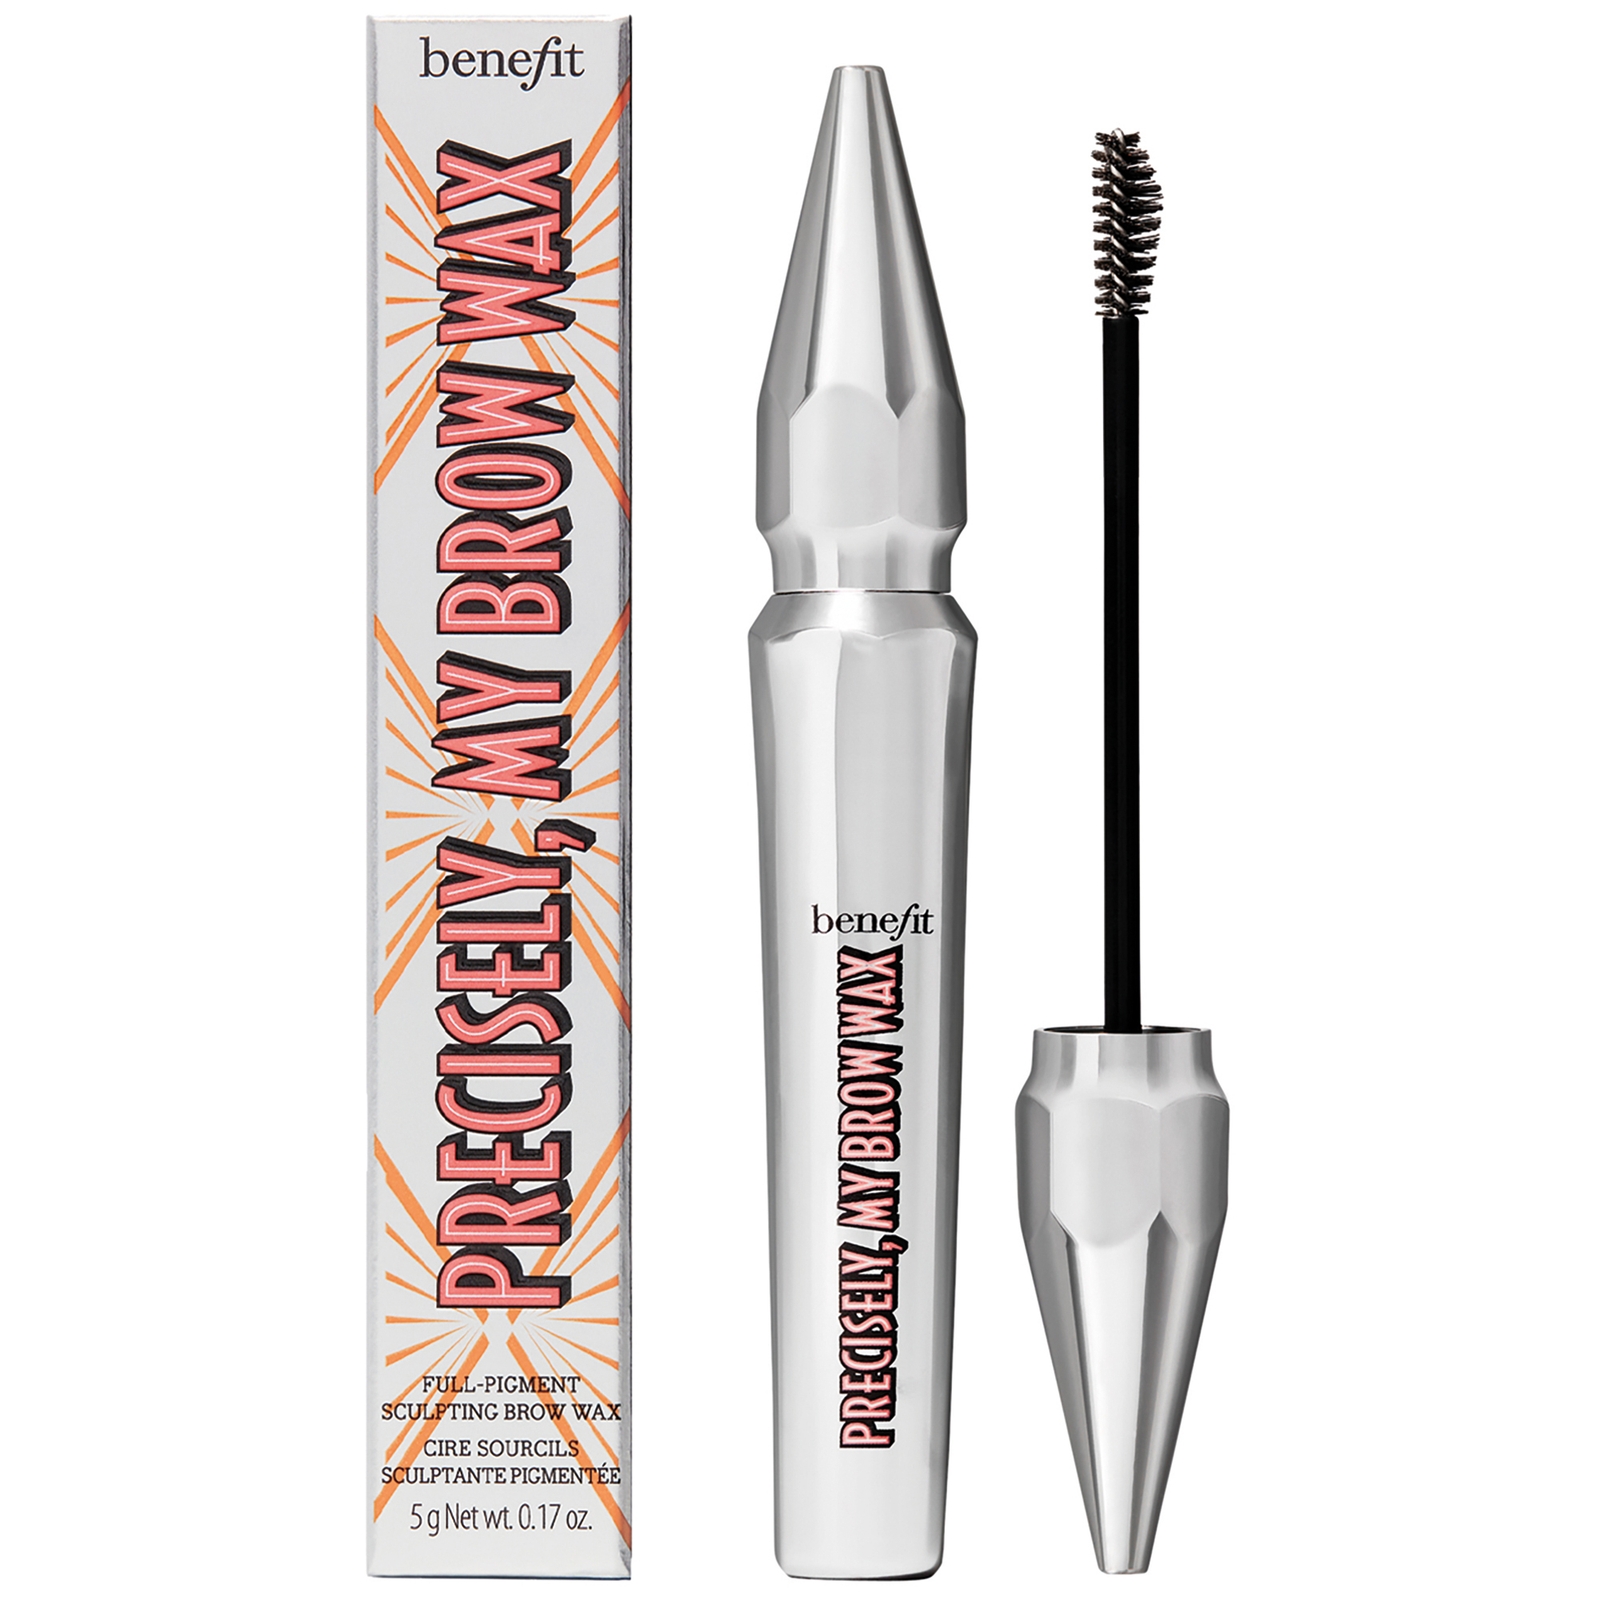 benefit Precisely My Brow Full Pigment Sculpting Brow Wax 5g (Various Shades) - 3 Light Brown